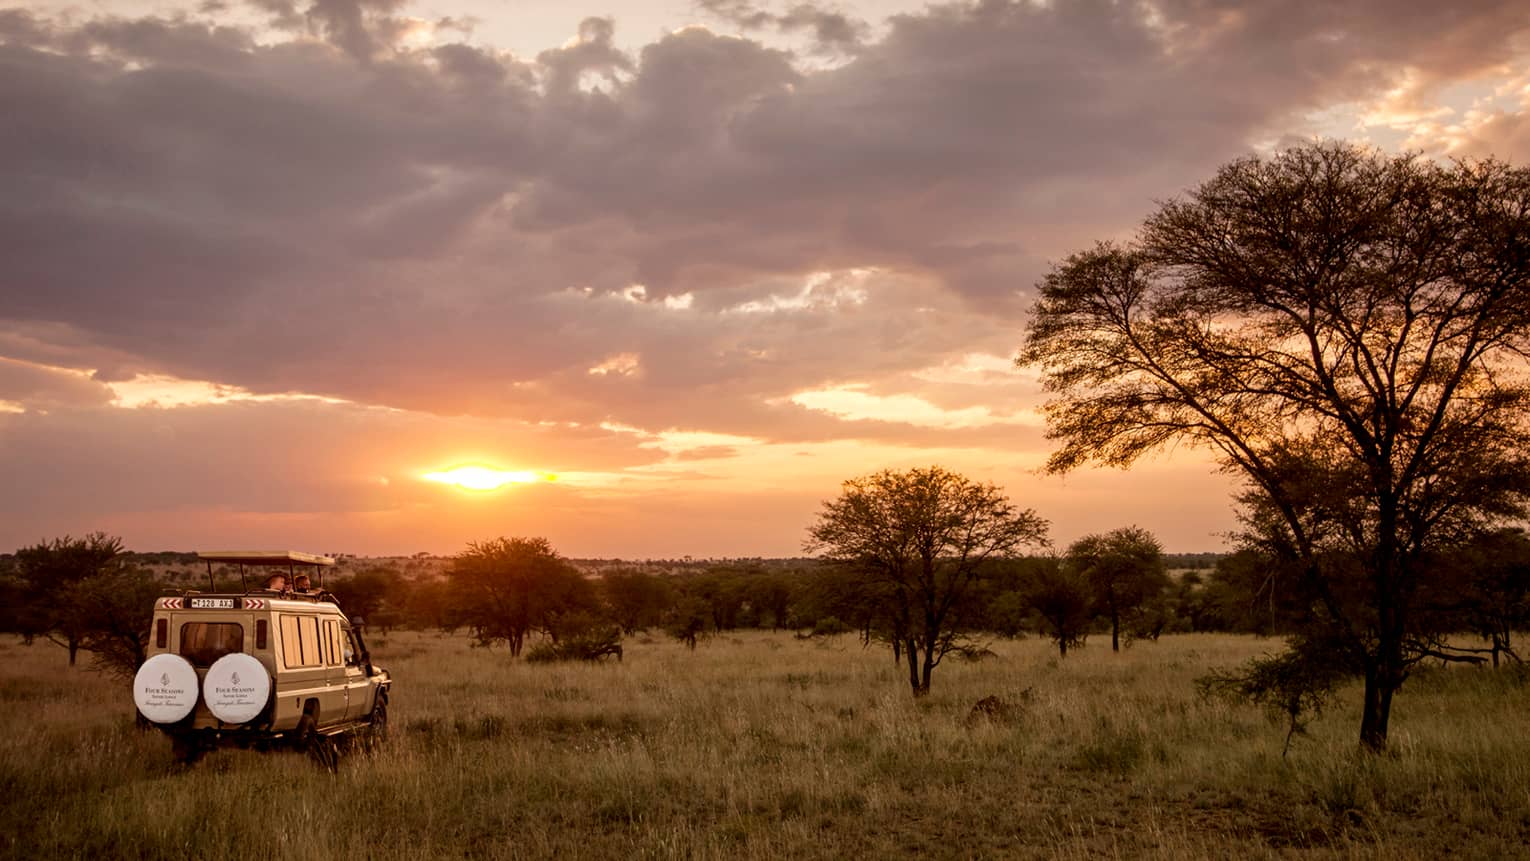 Sunset over safari jeep parked in grassy field by tree